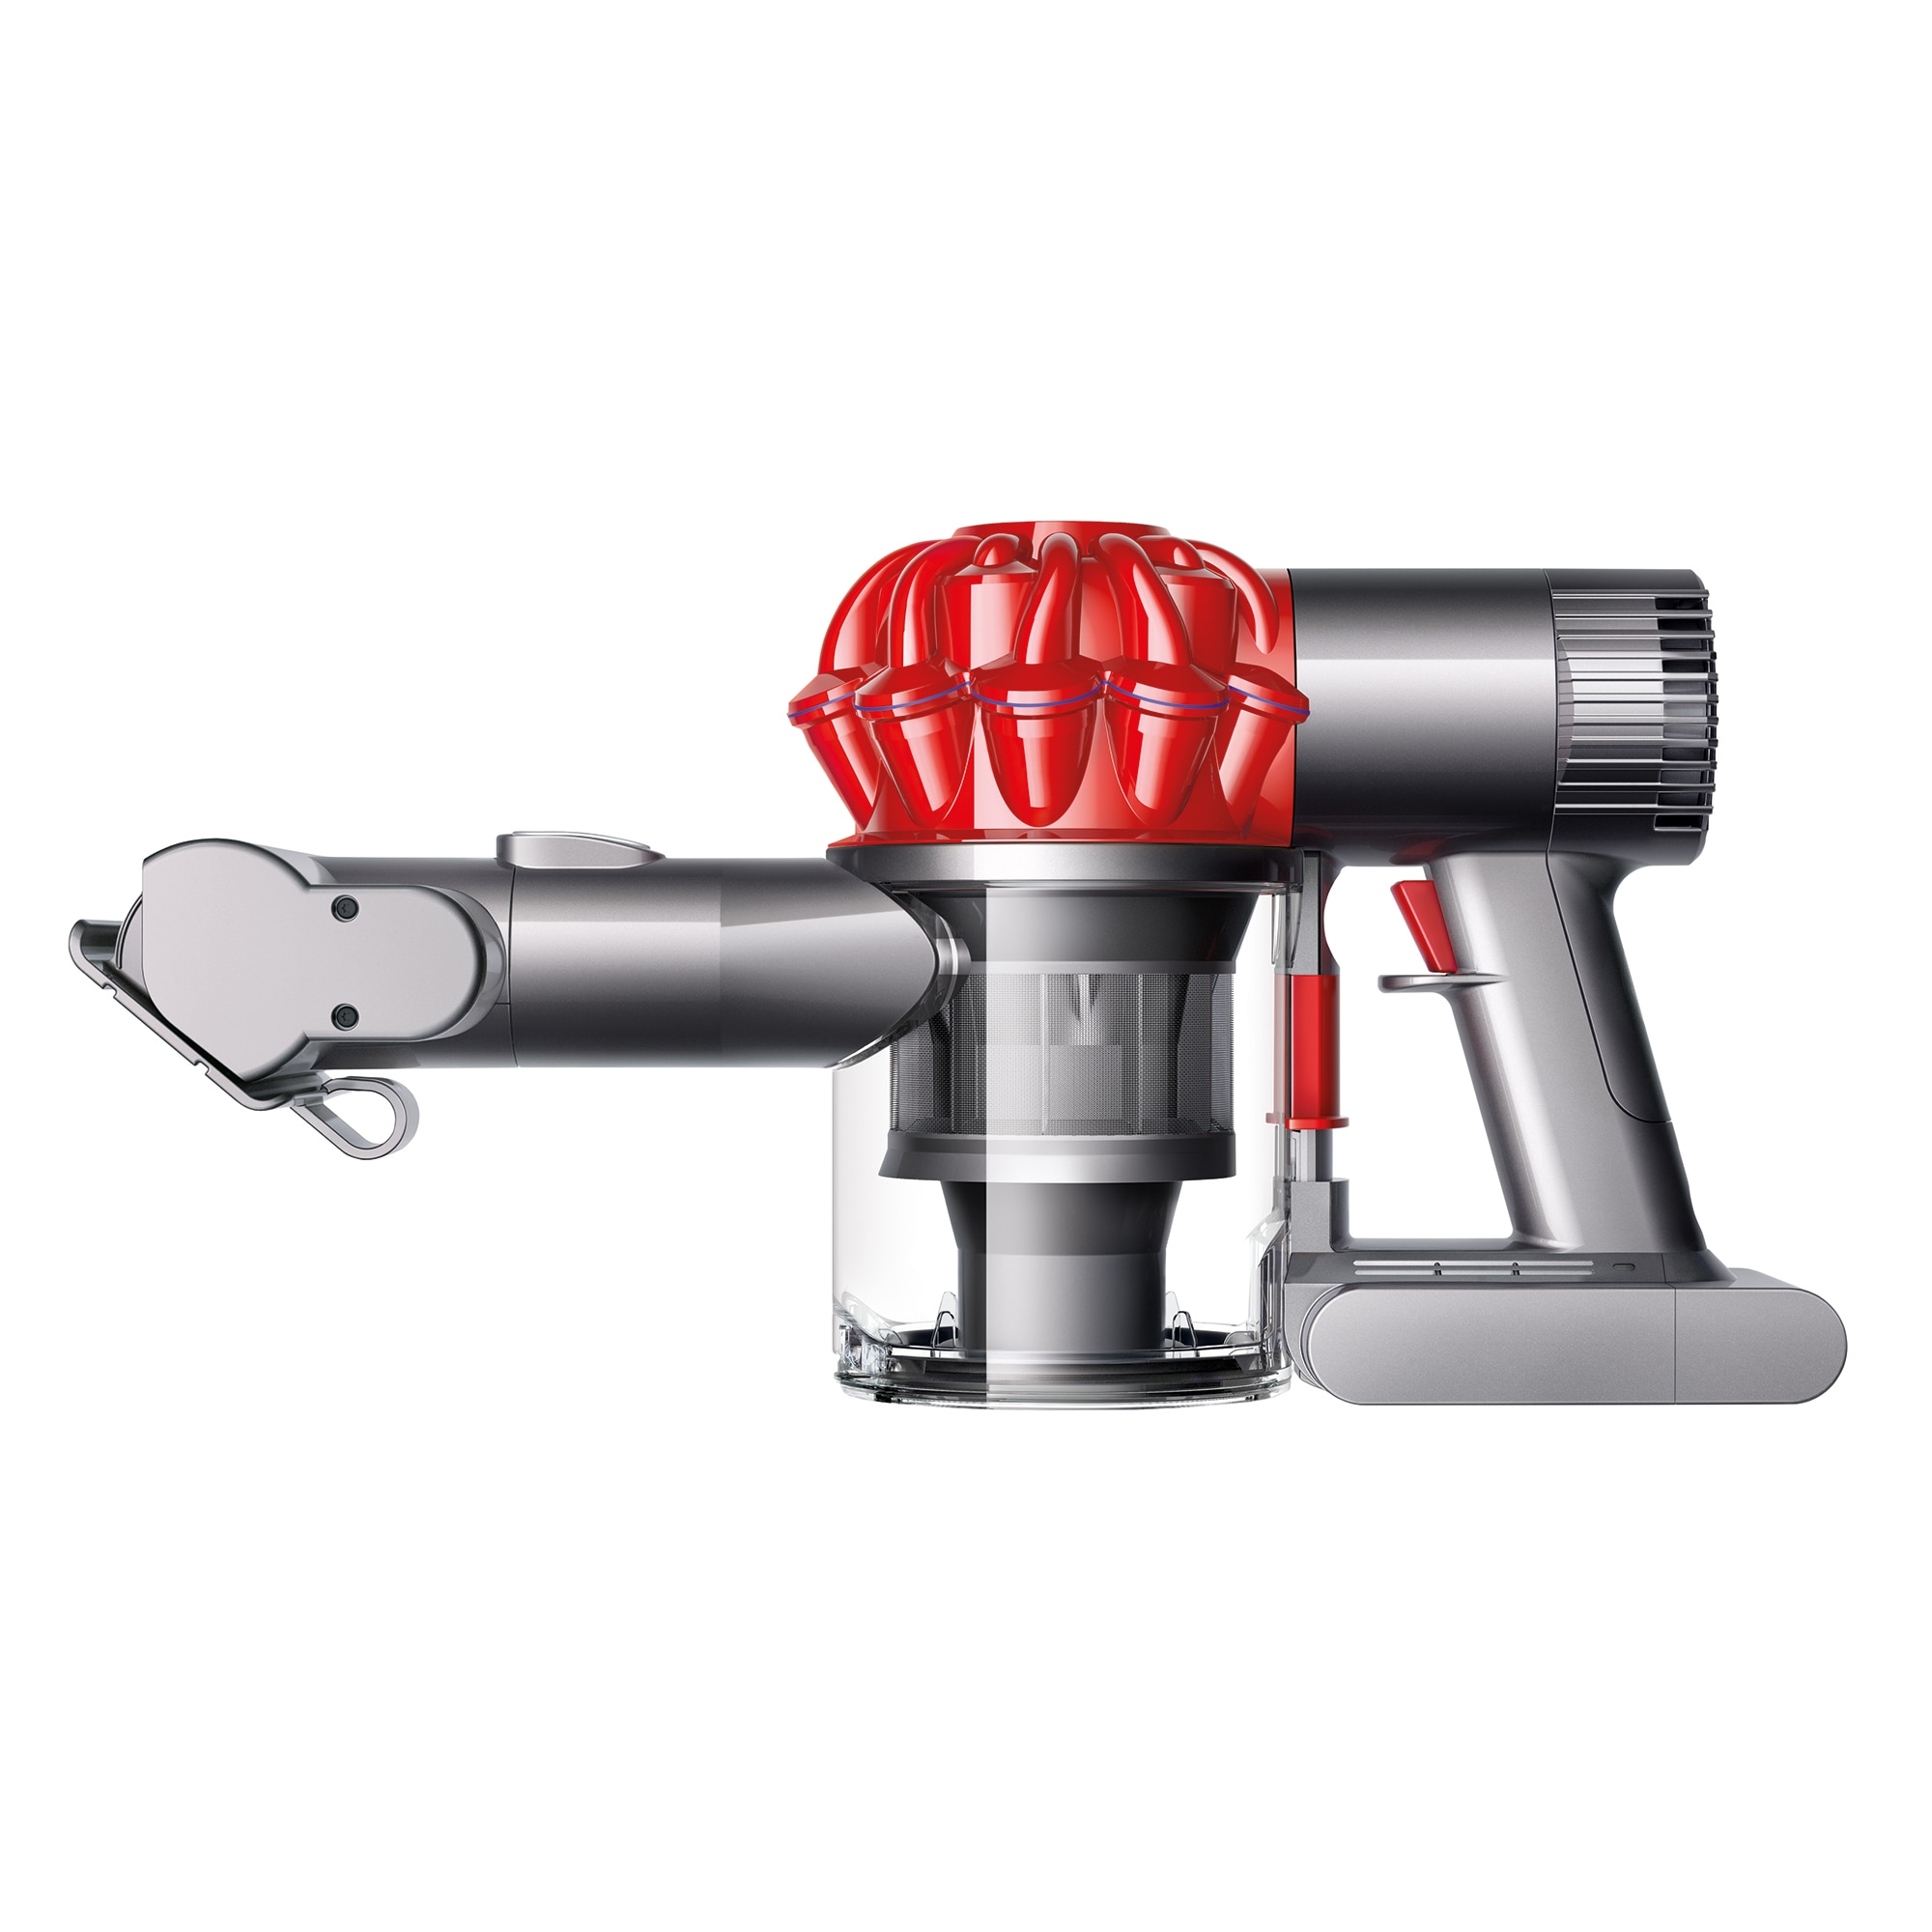 Boat Details about   Dyson V6 Car Red Truck Cordless Cord-Free Handheld Vacuum Cleaner 